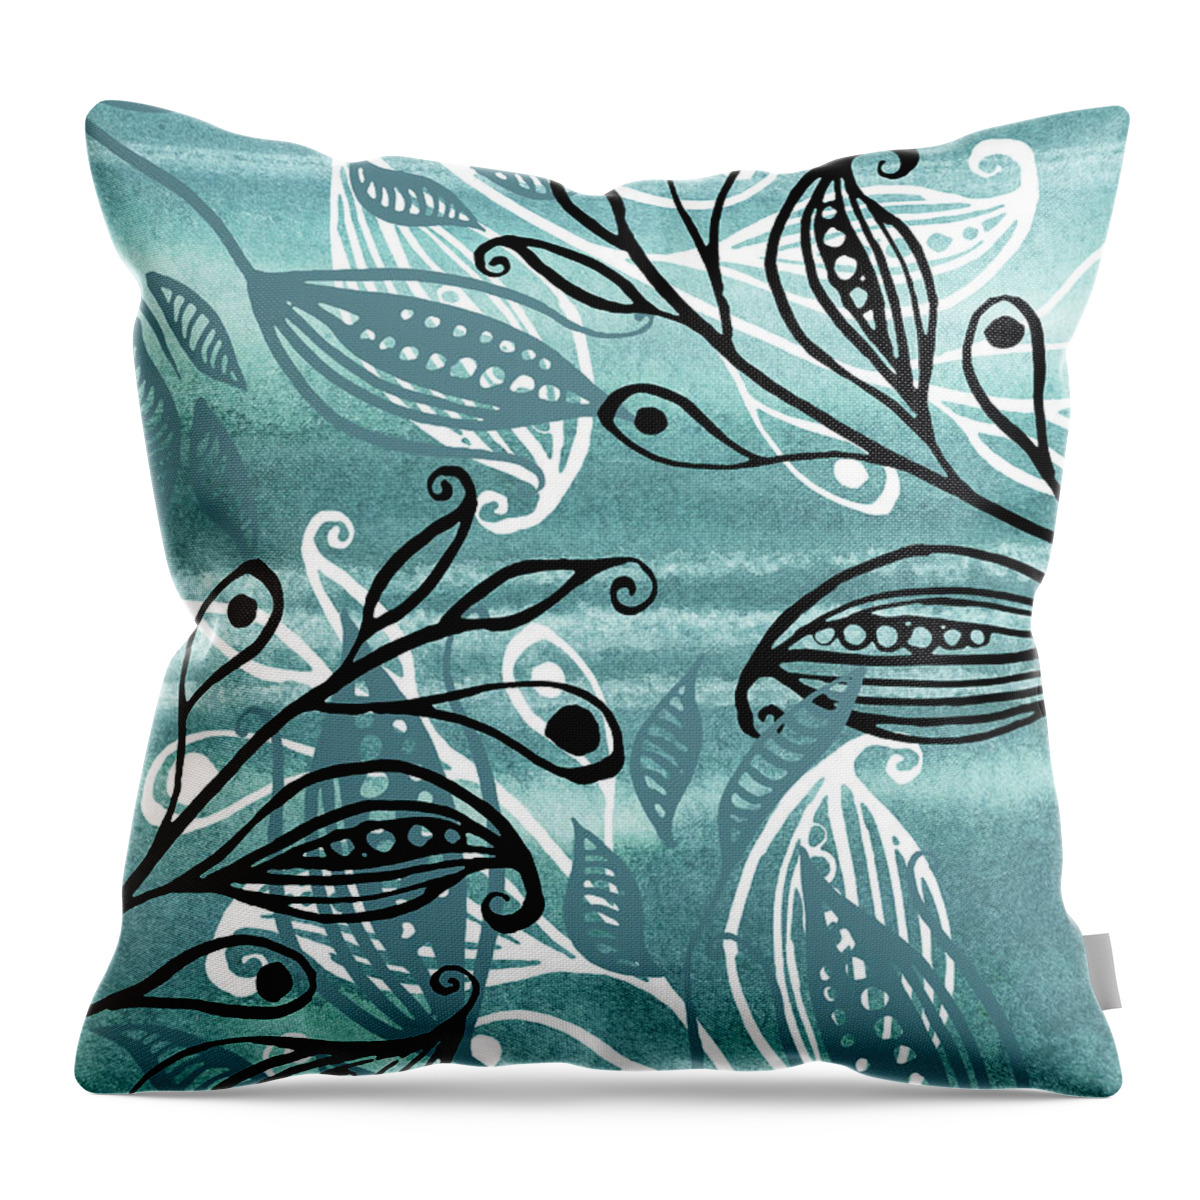 Pods Throw Pillow featuring the painting Elegant Pods And Seeds Pattern With Leaves Teal Blue Watercolor V by Irina Sztukowski